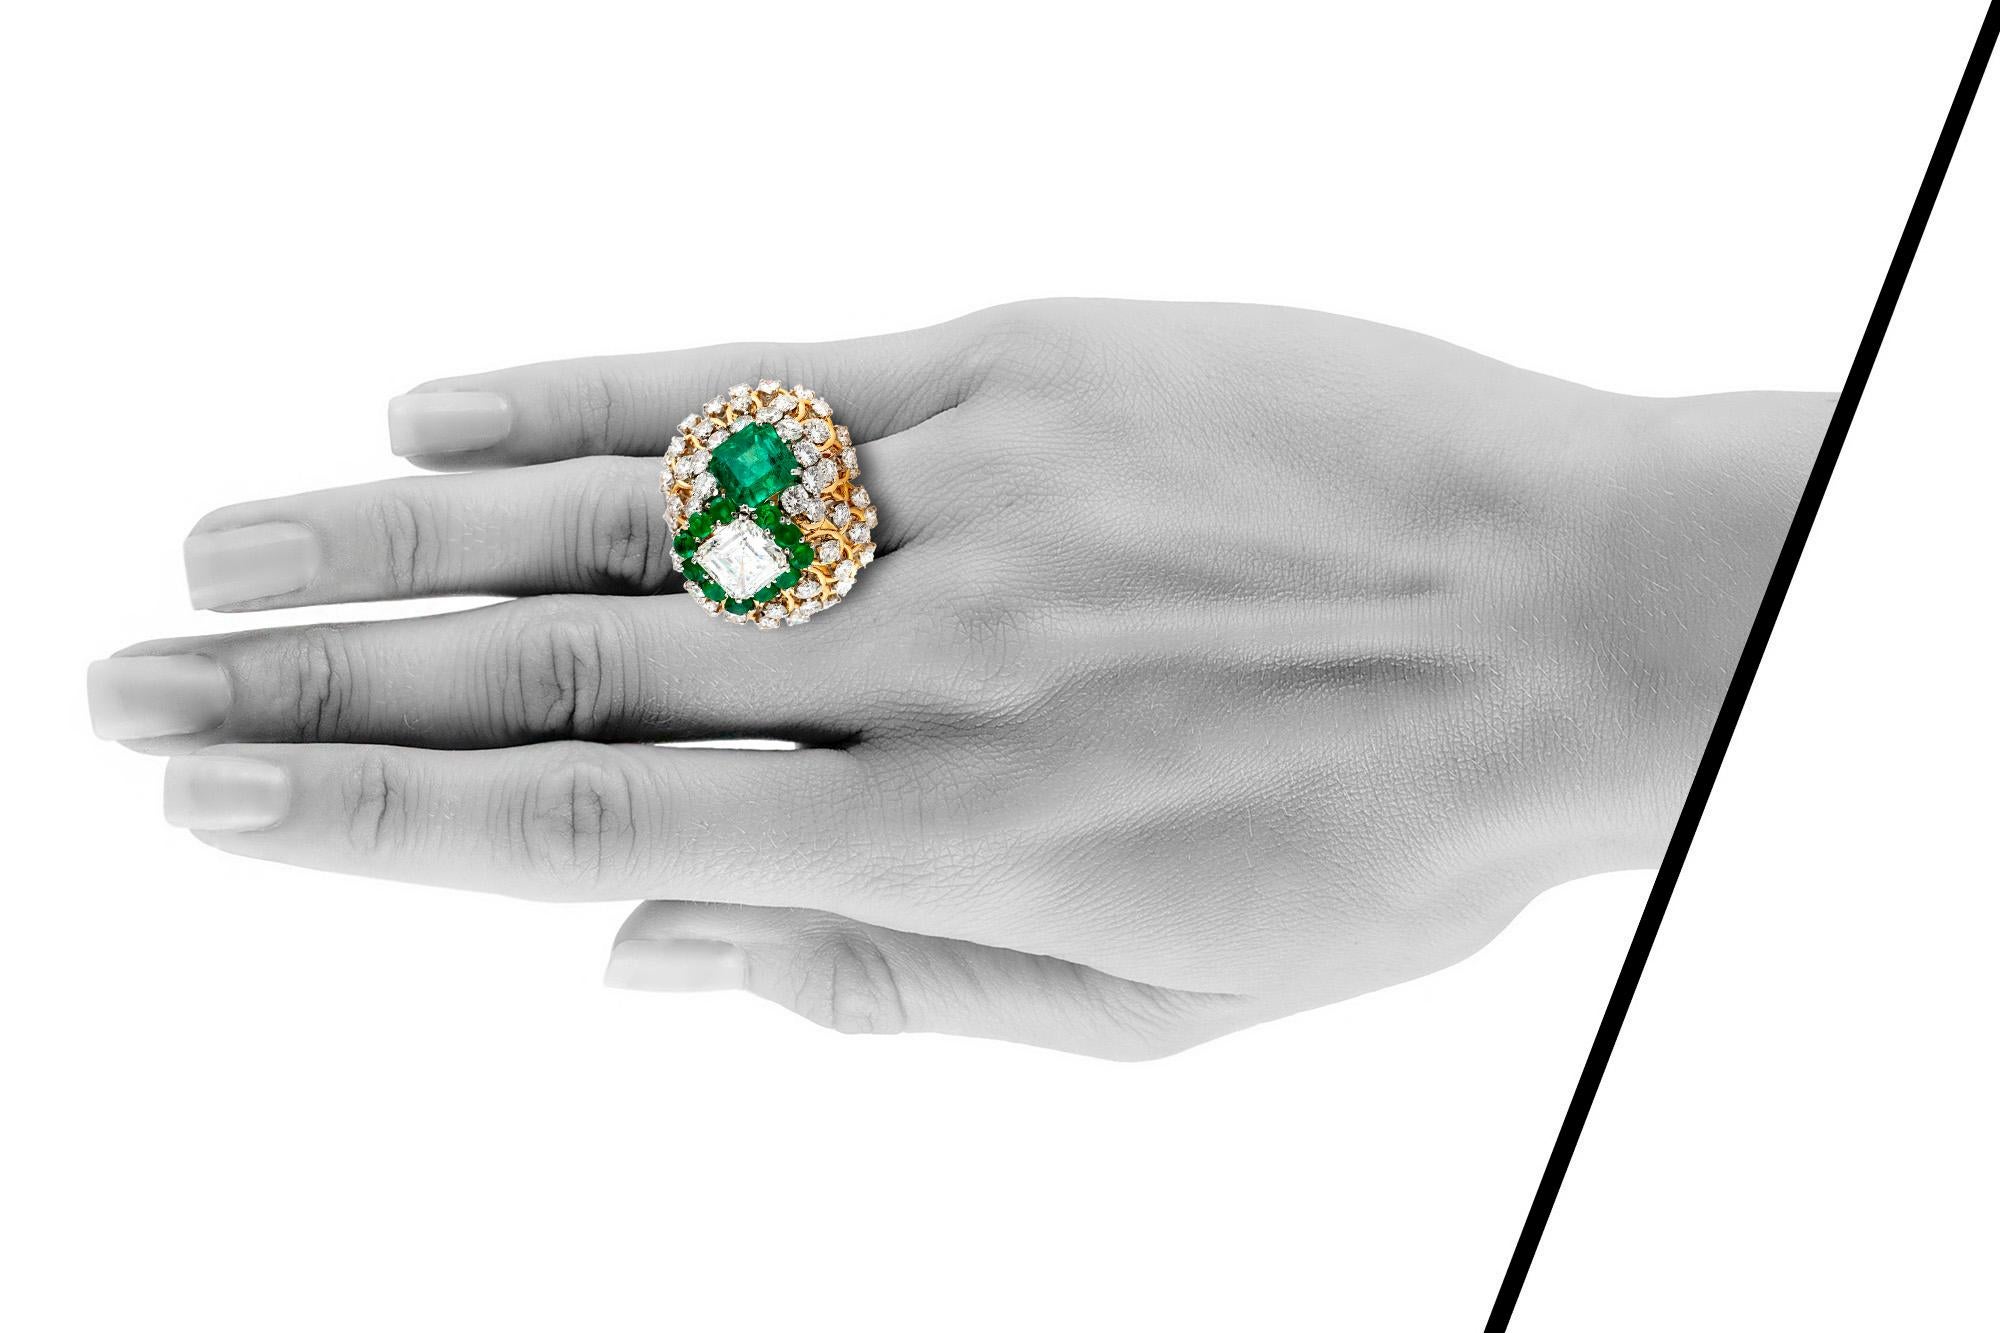 David Webb cocktail ring, finely crafted in 18 k yellow gold and platinum, featuring 3.10 Carat Asscher cut-diamond; GIA certified G color and VS2 clarity, and 4.43 carat Emerald cut emerald; AGL certified. The two stones are accented with round